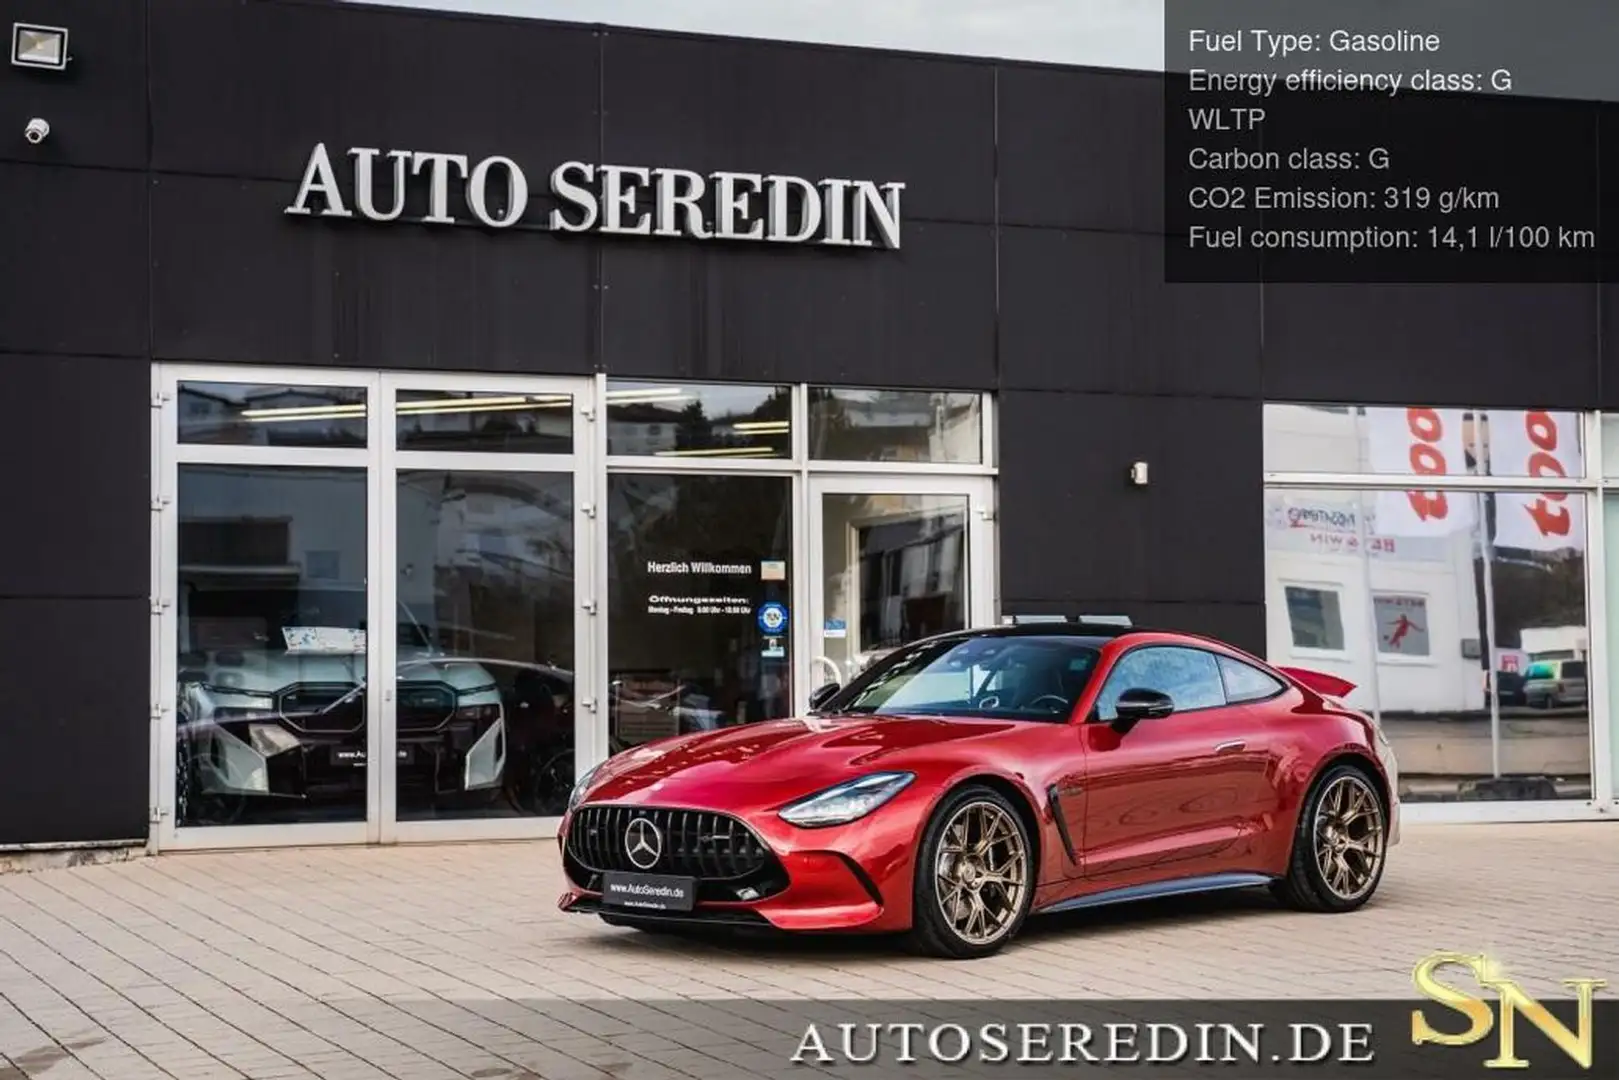 Mercedes-Benz AMG GT 63 4M+ Coupe Carbon Exterior + Performance Seats Red - 1